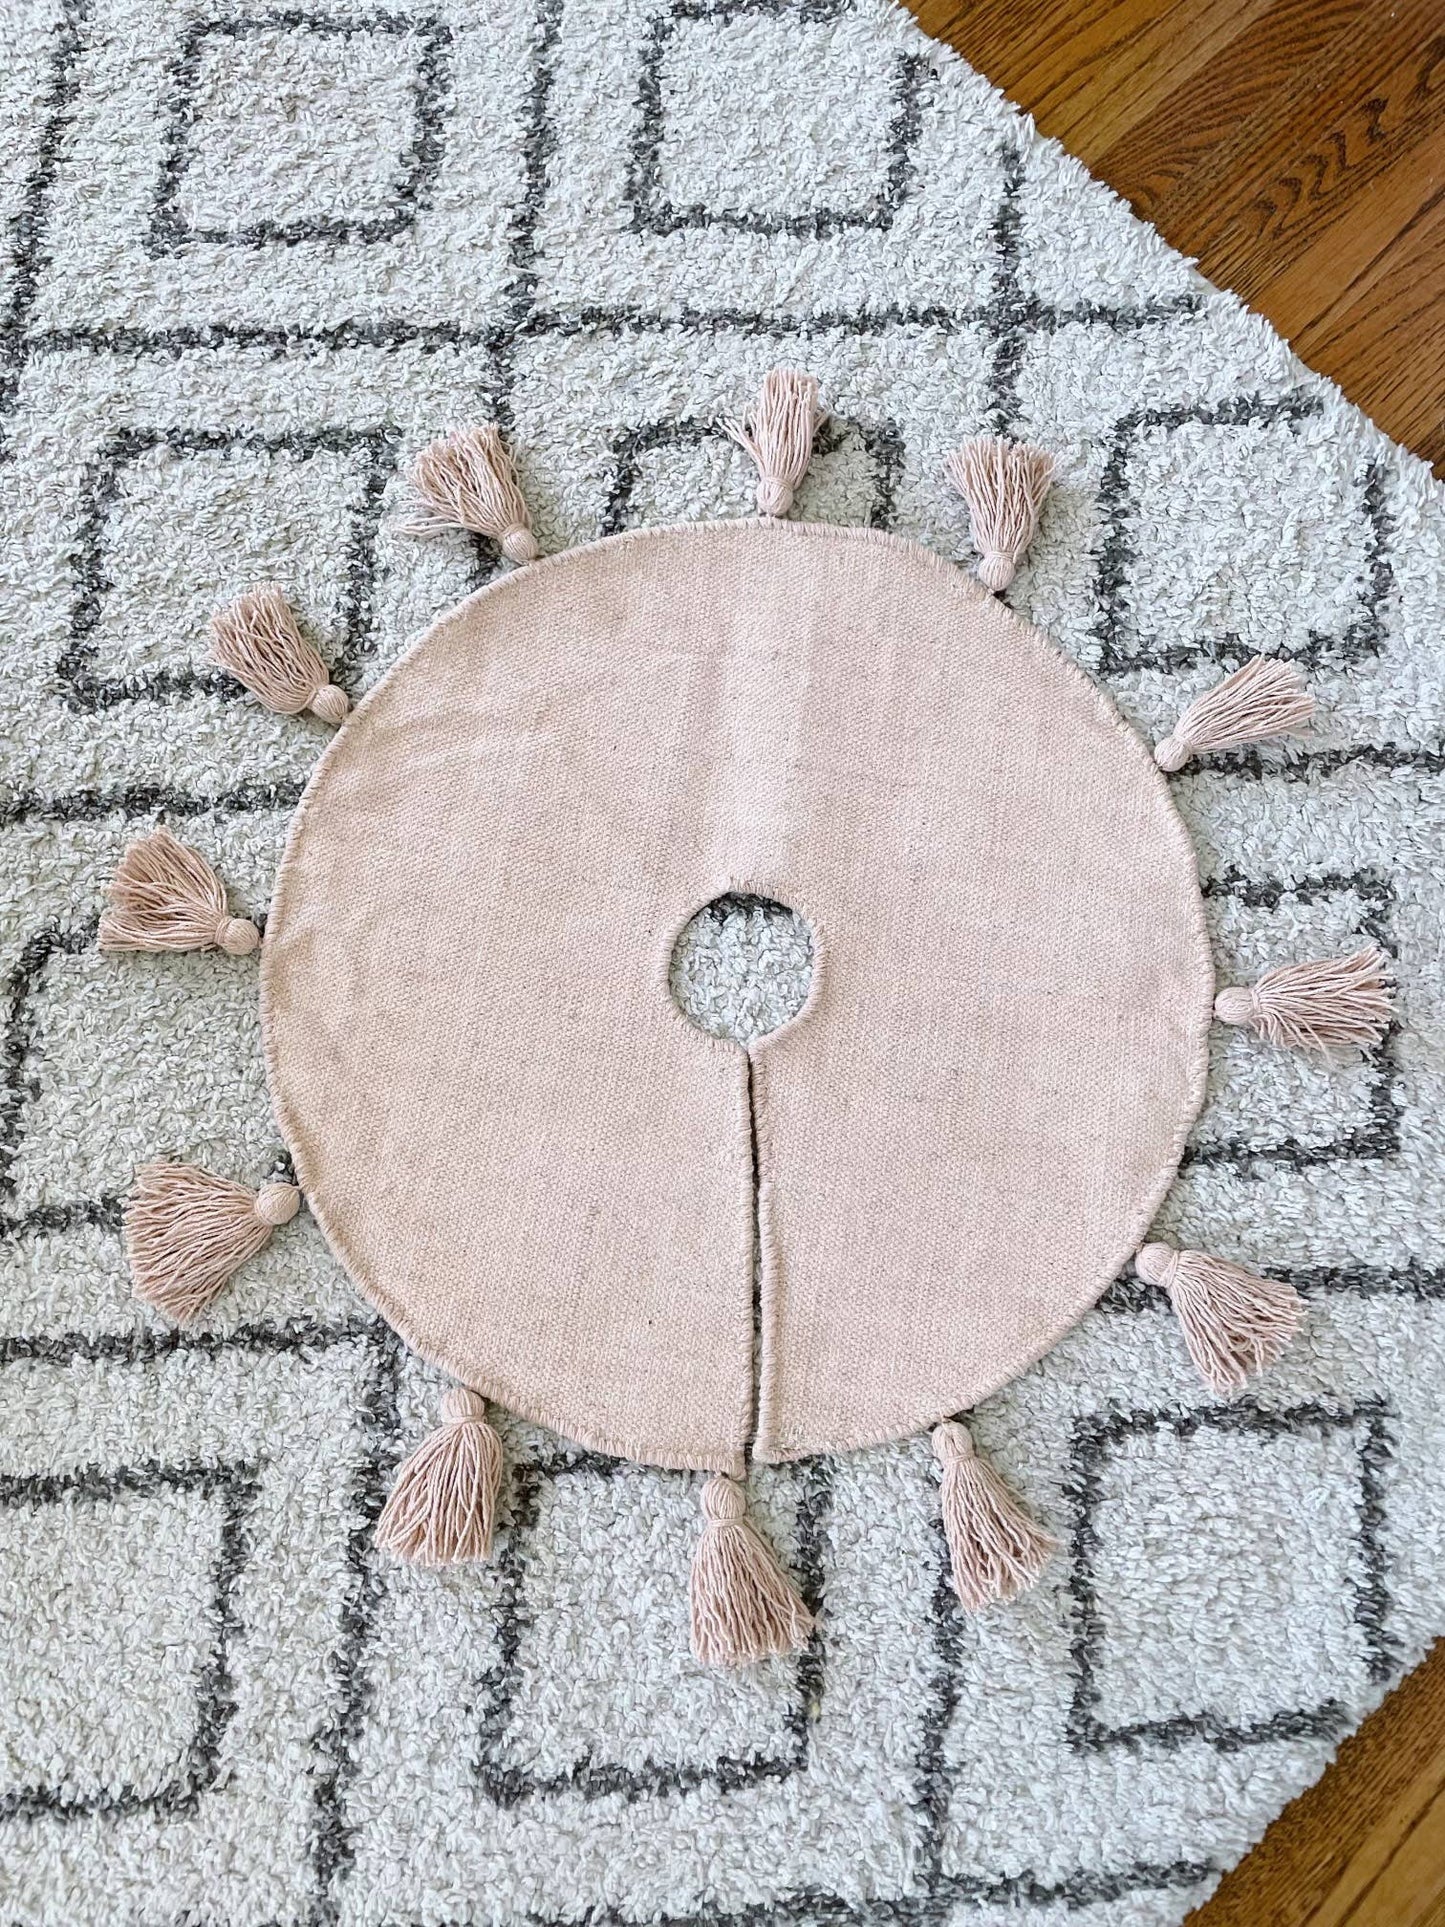 NOEL by Alma Home - Pink Canvas Christmas Tree Skirt